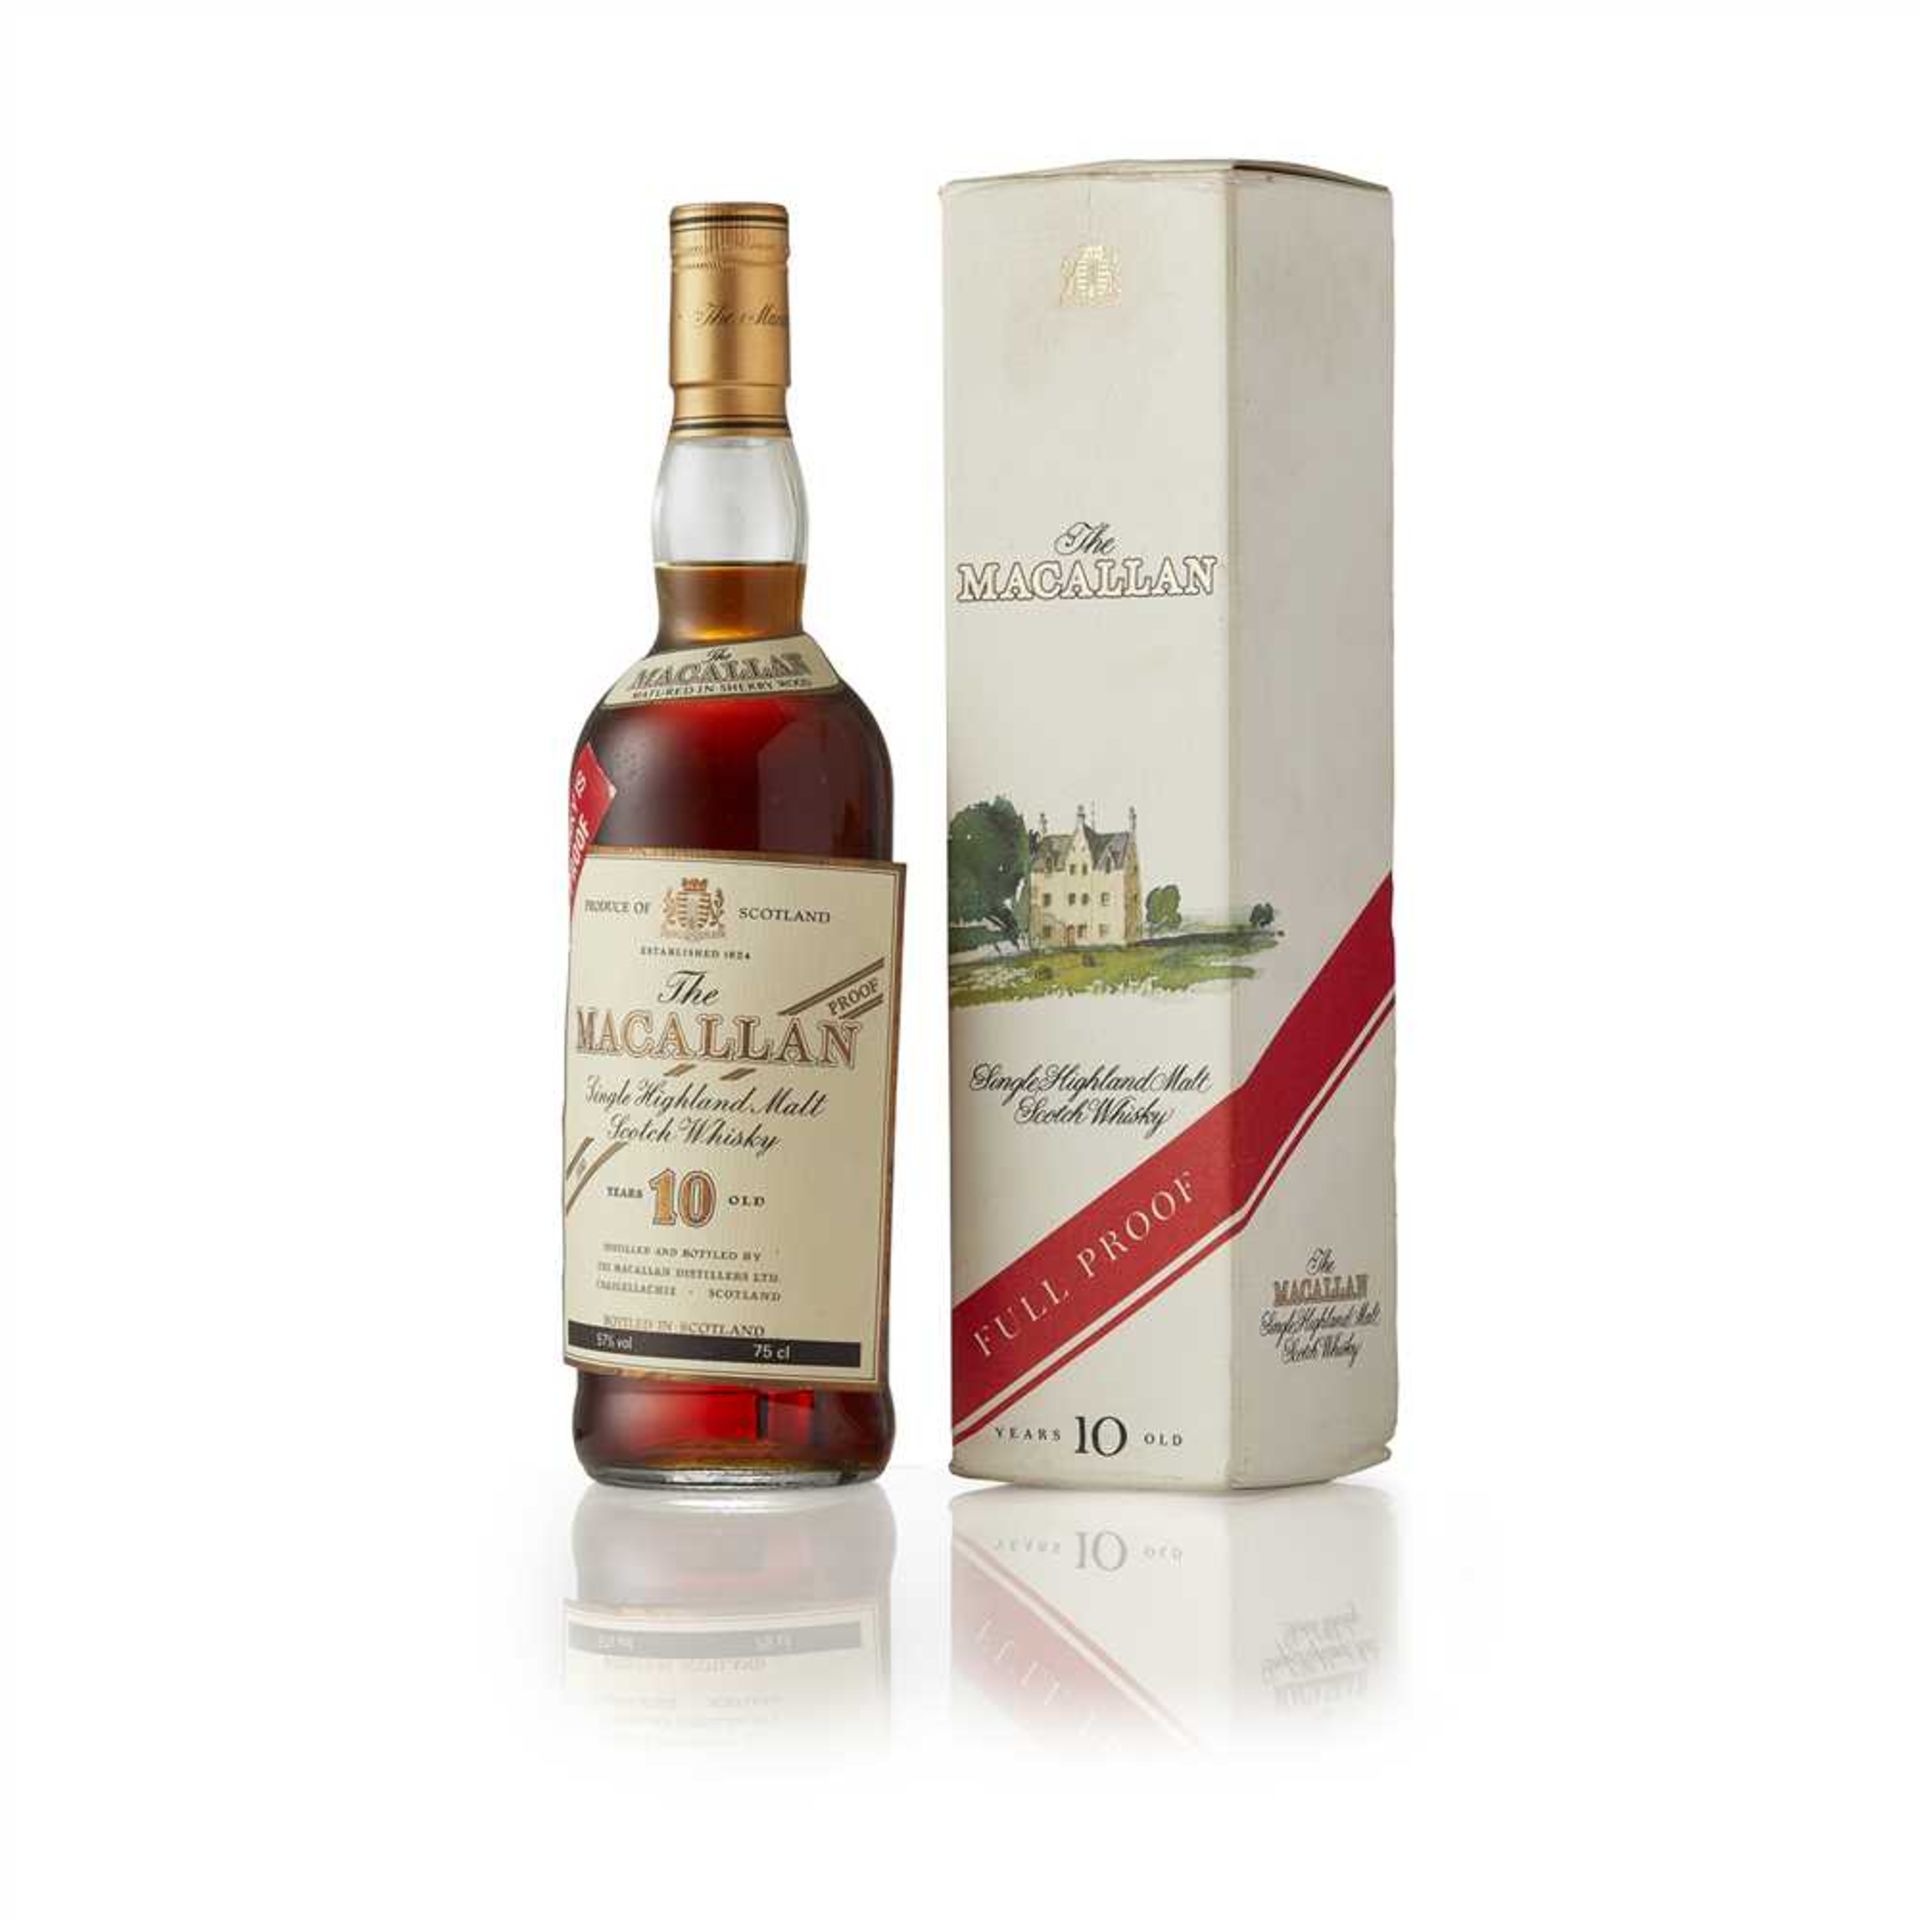 THE MACALLAN 10 YEAR OLD 100 PROOF (1980S)